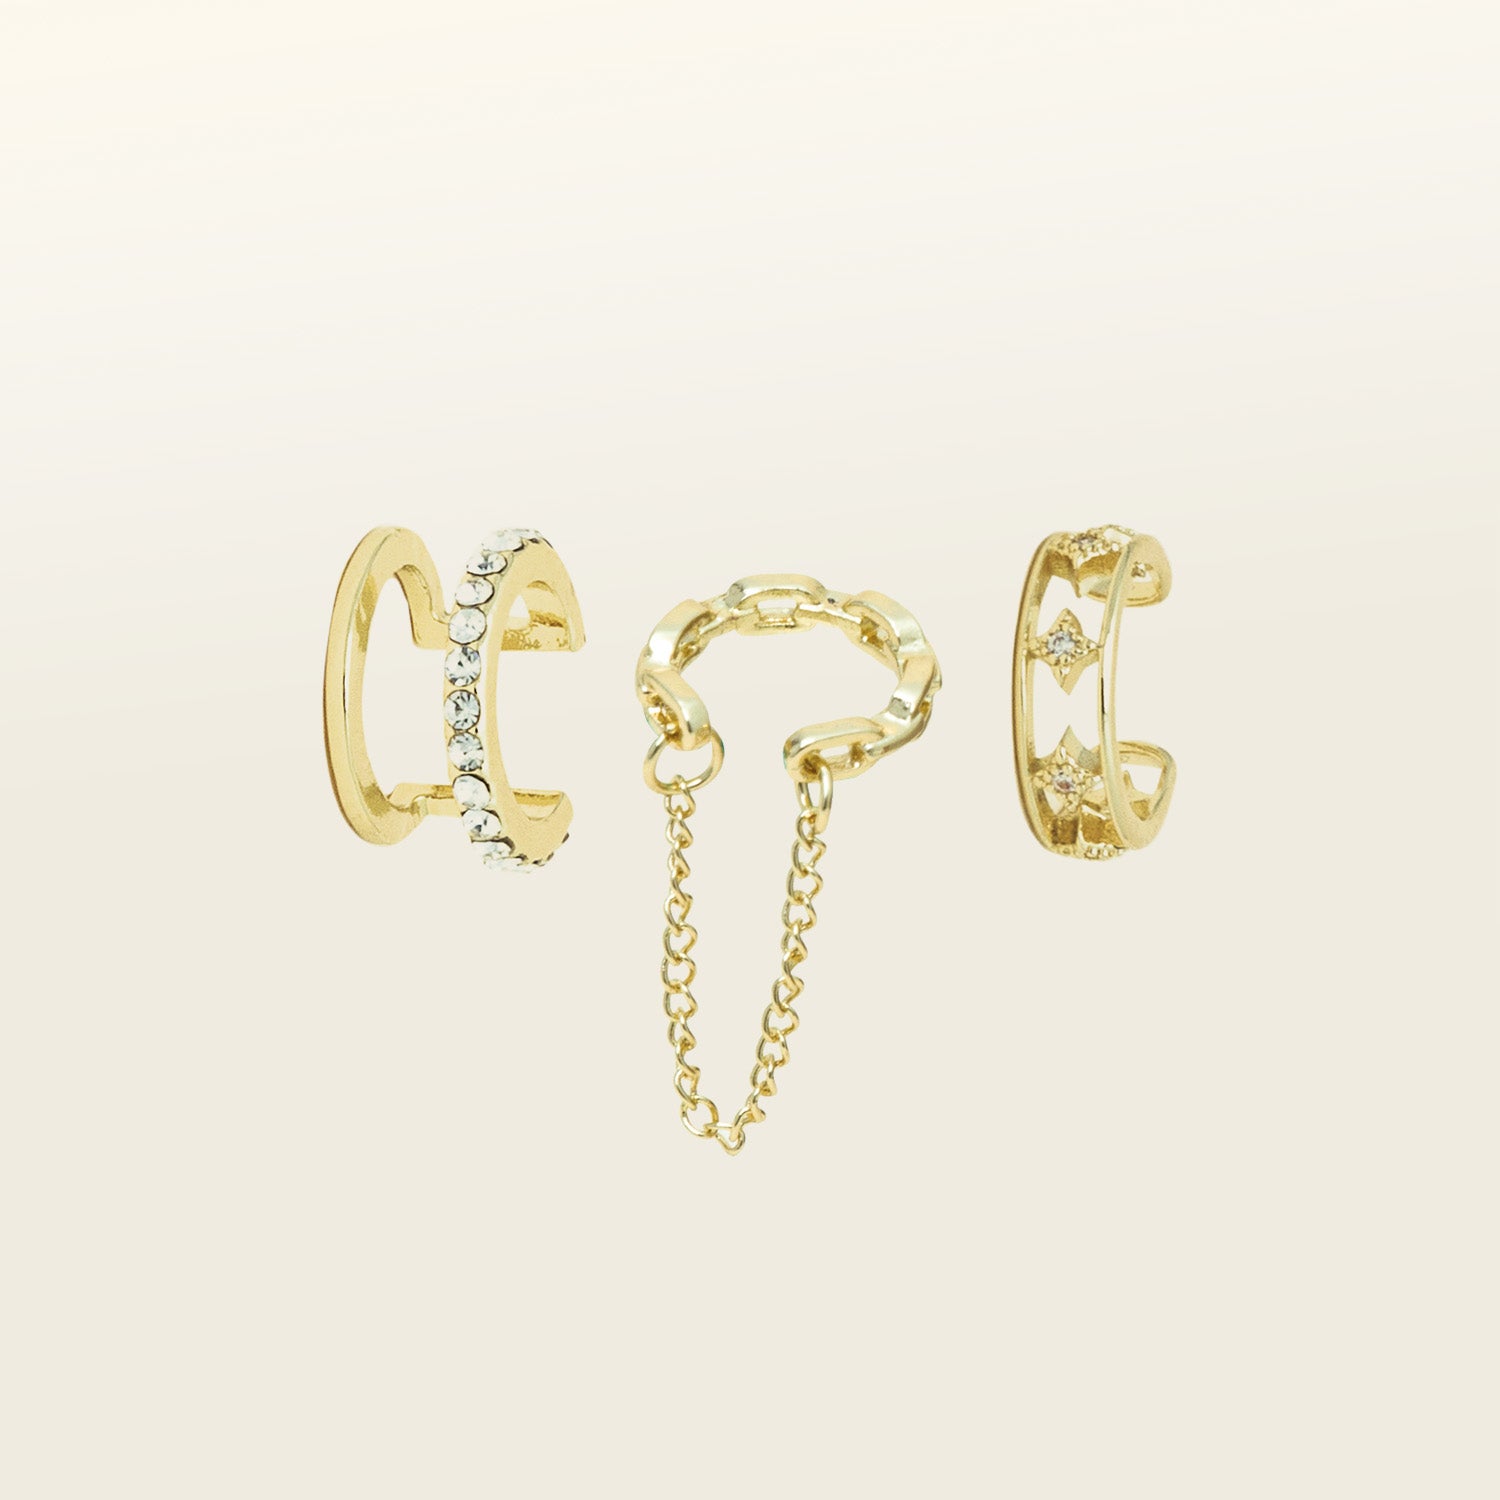 Image of the Ear Cuffs Trio set includes 1pc each of a Dual Chain Ear Cuff, Star Ear Cuff, and Multi Band Ear Cuff. All items come with three pieces. The material composition of the collection is gold plated alloy and cubic zirconia.